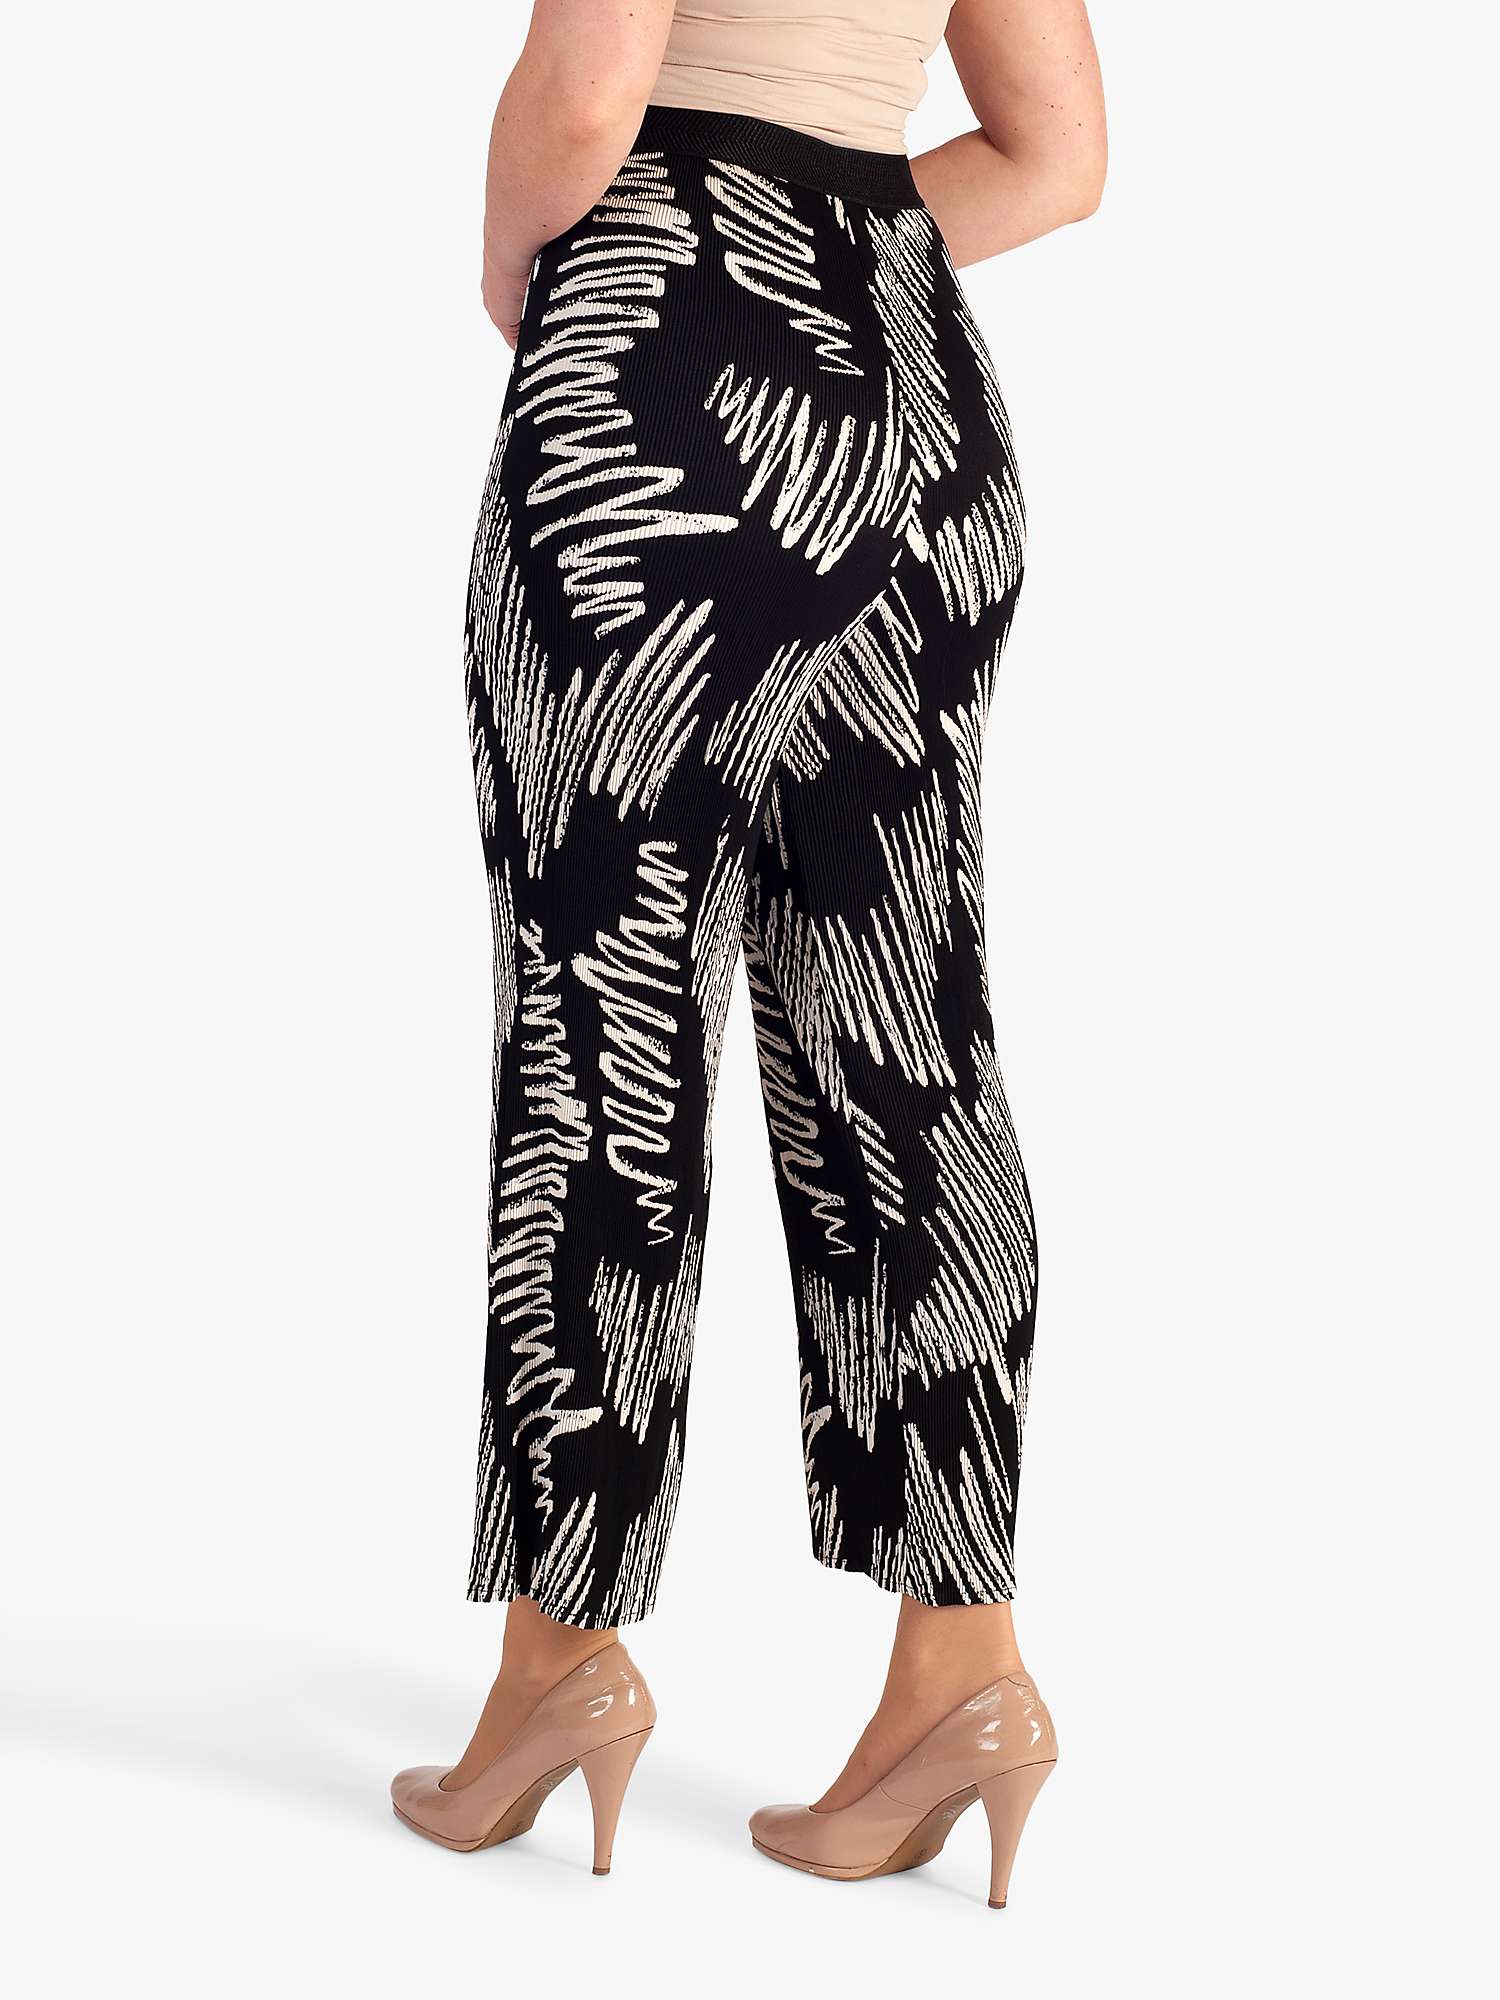 Buy chesca Scribble Print Plisse Trousers, Black/White Online at johnlewis.com